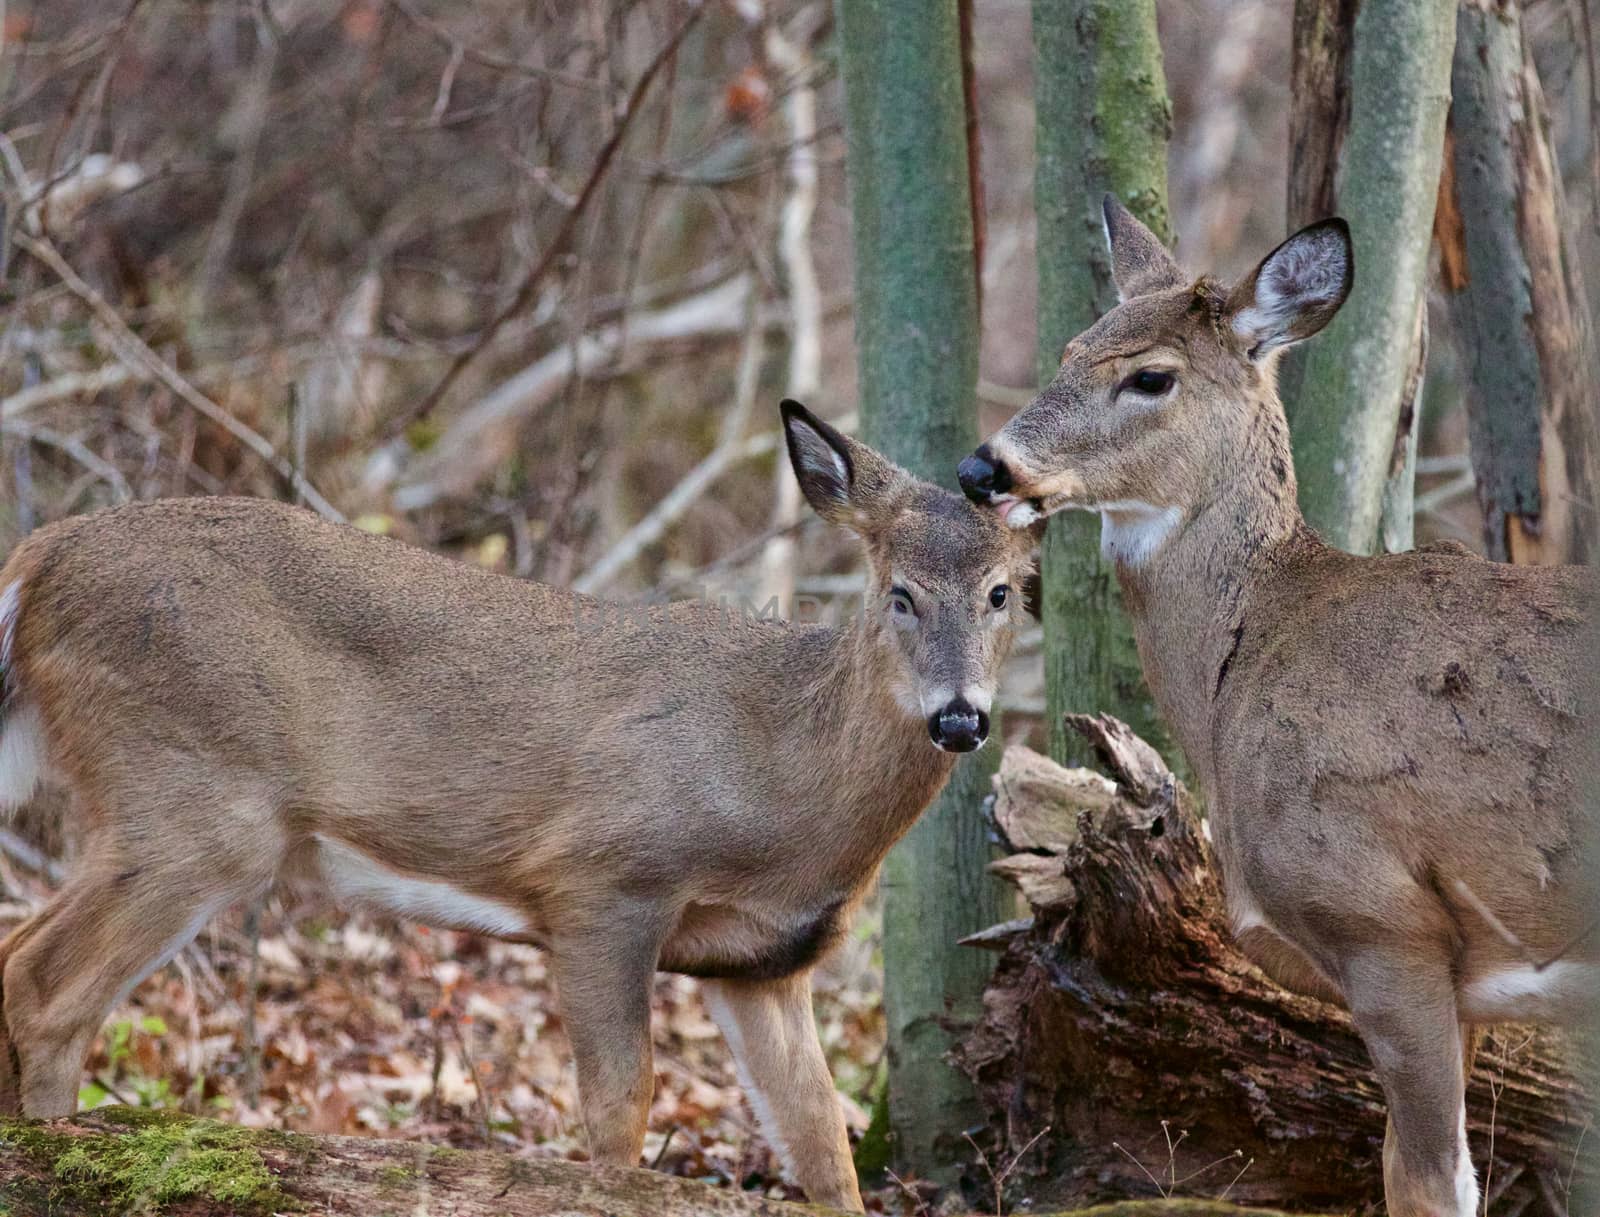 Cute pair of deers in the forest by teo